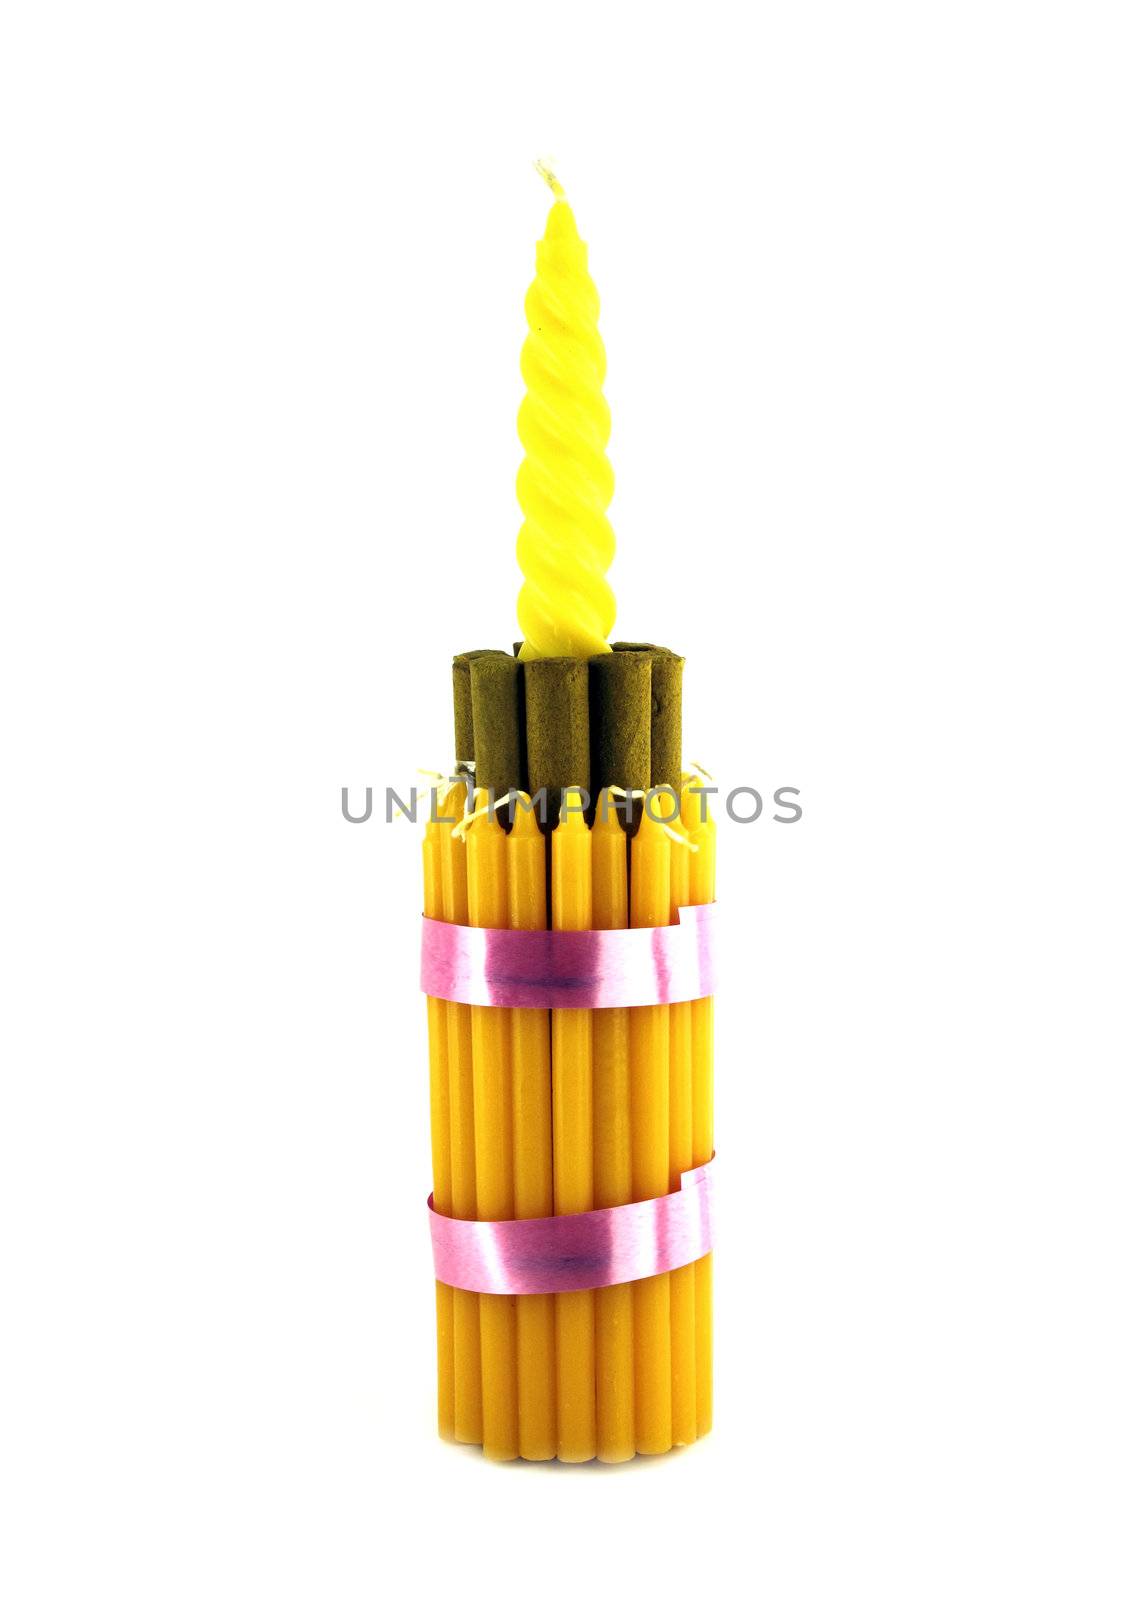 Incense and Candle on white background for Loy Kratong festival, Thailand